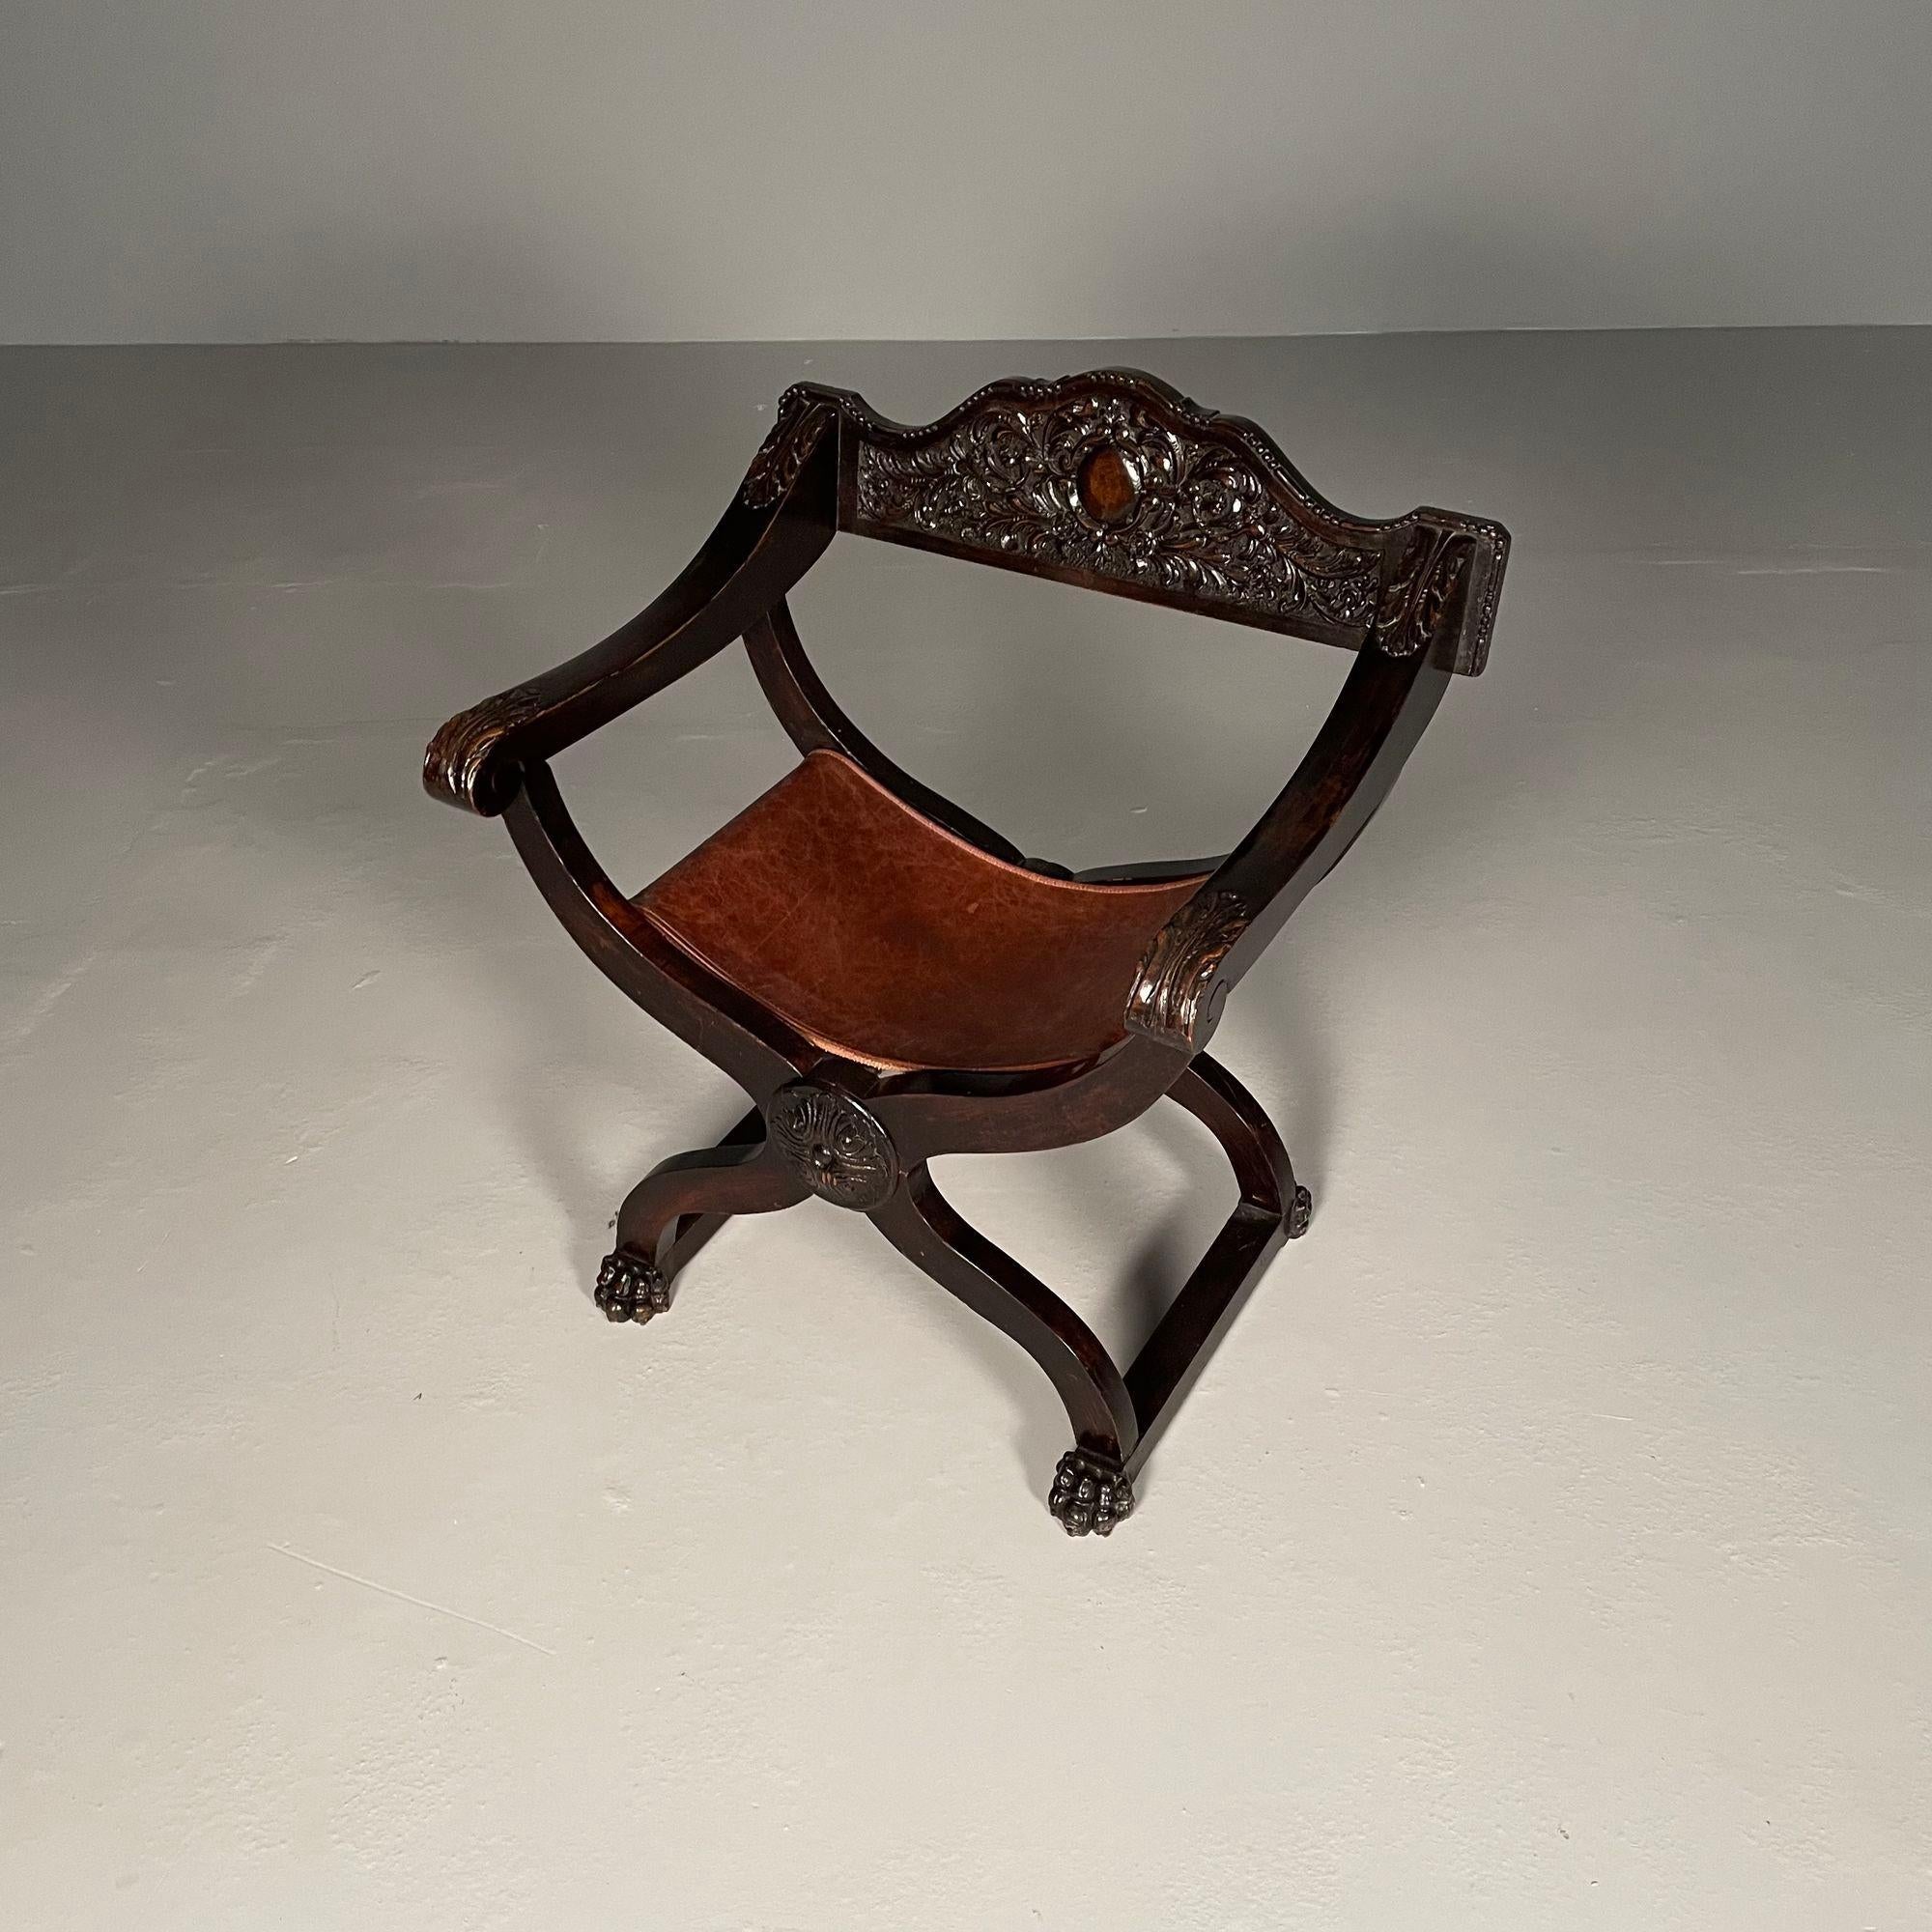 Italian Renaissance Arm / Office Chair, Carved, Leather Seat, 19th Century For Sale 1